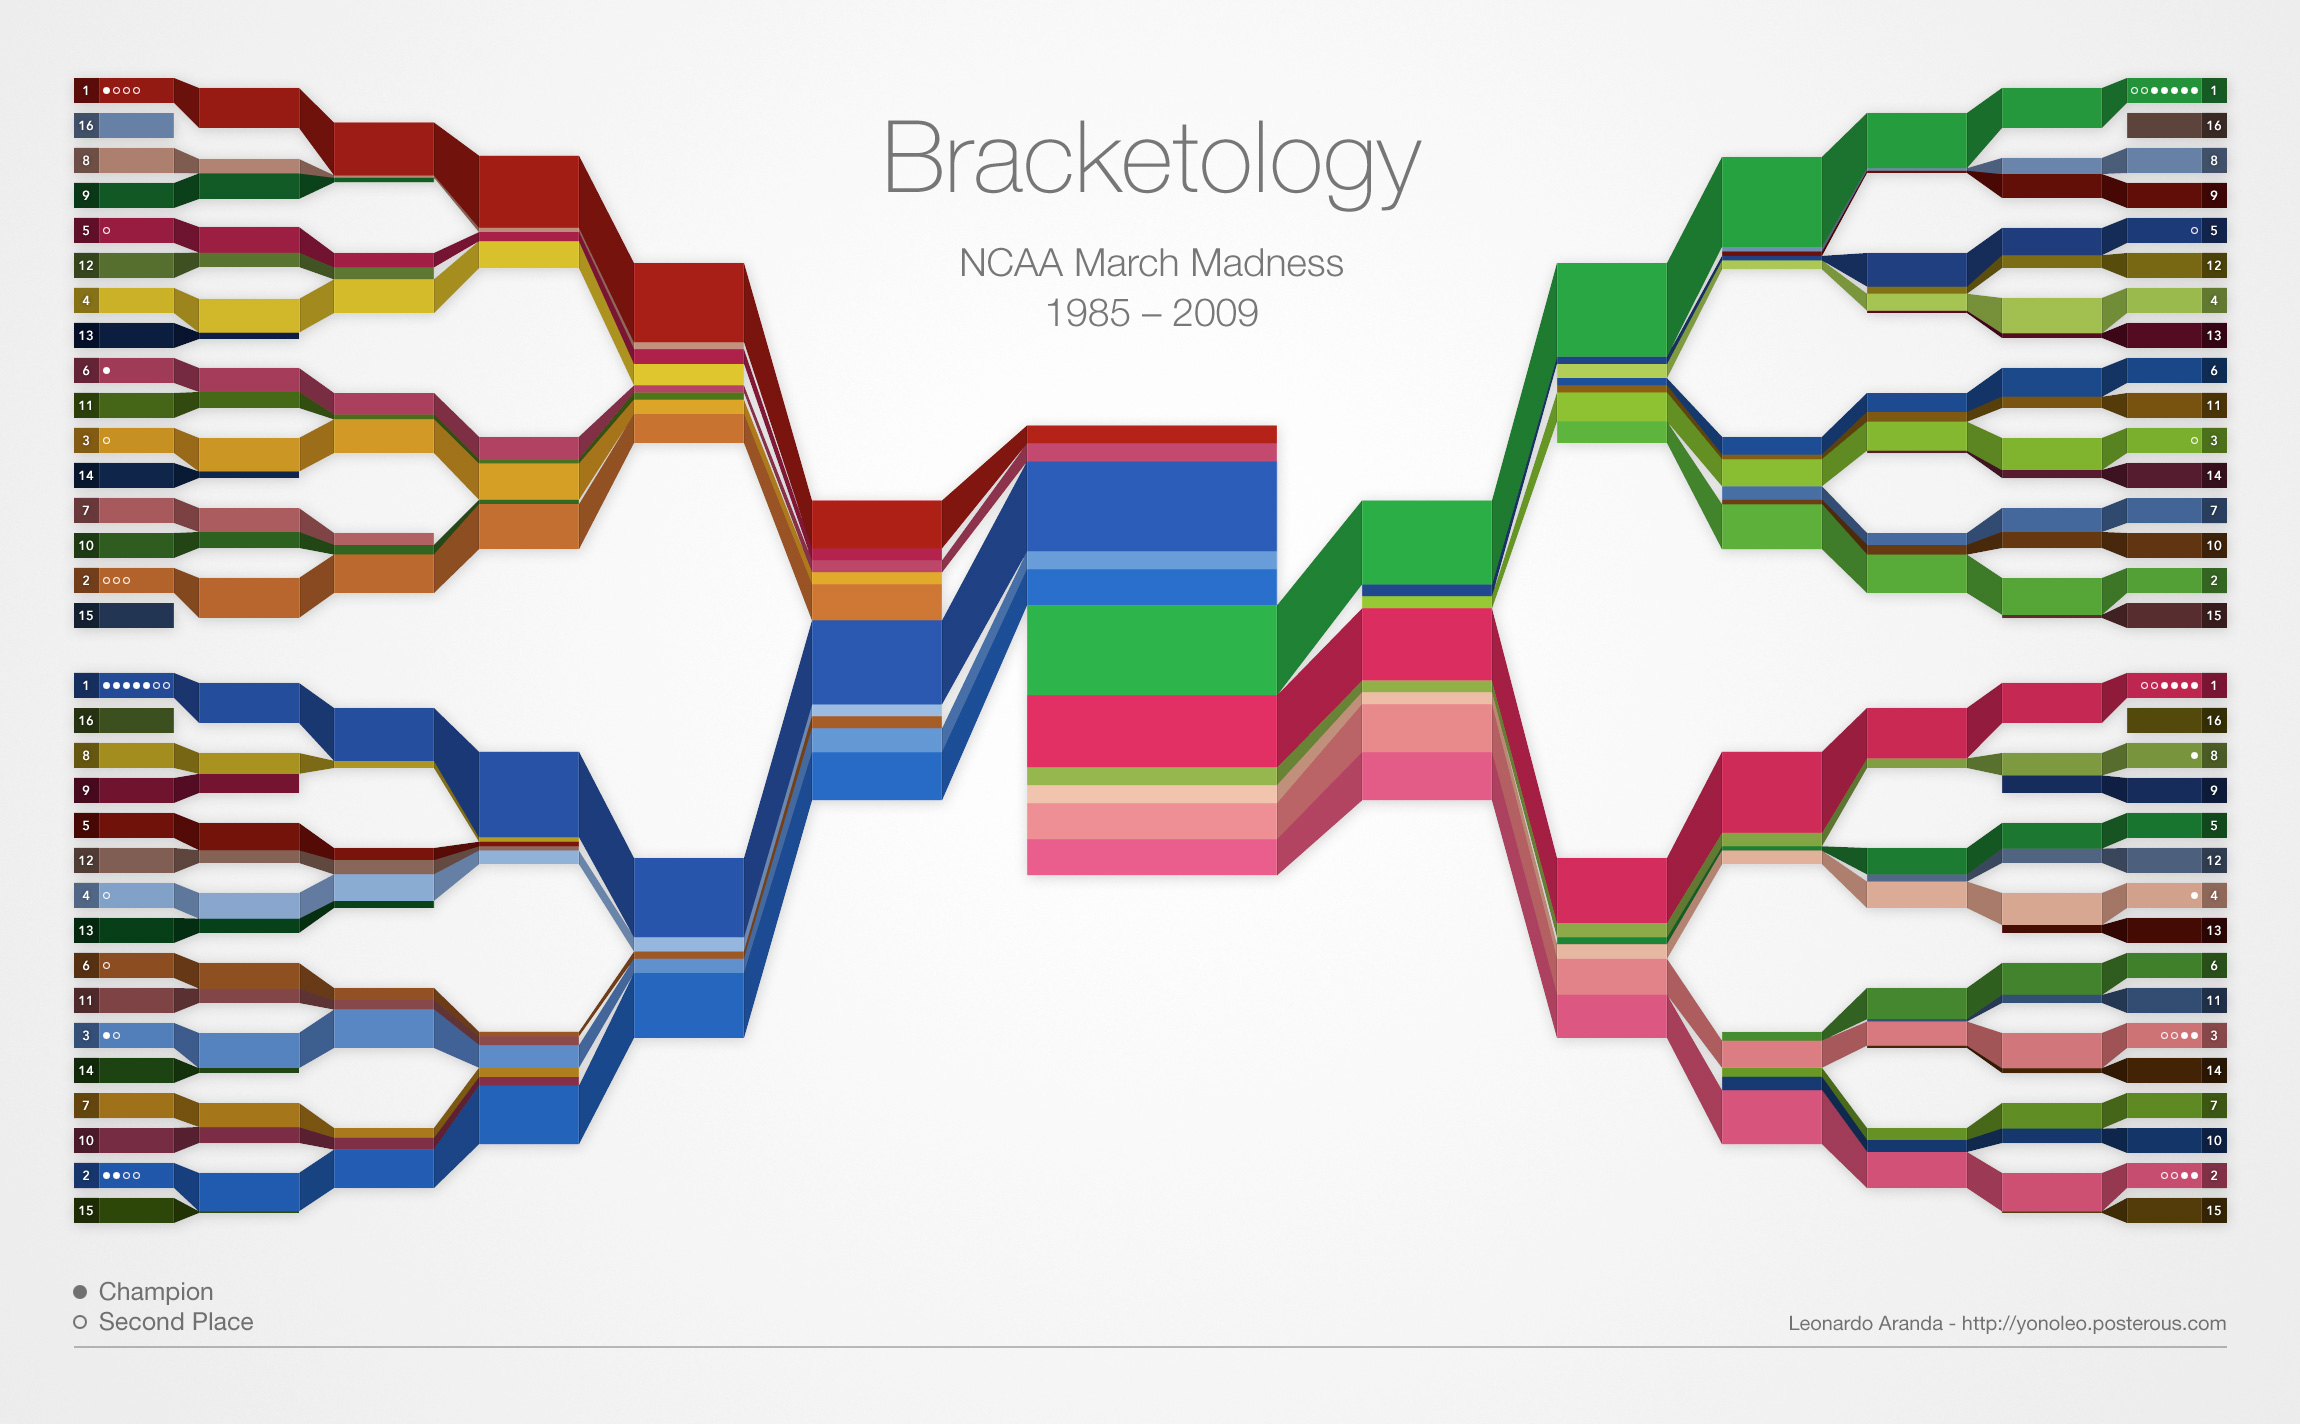 The NCAA Bracket is a Queue Another Type of Waiting Line